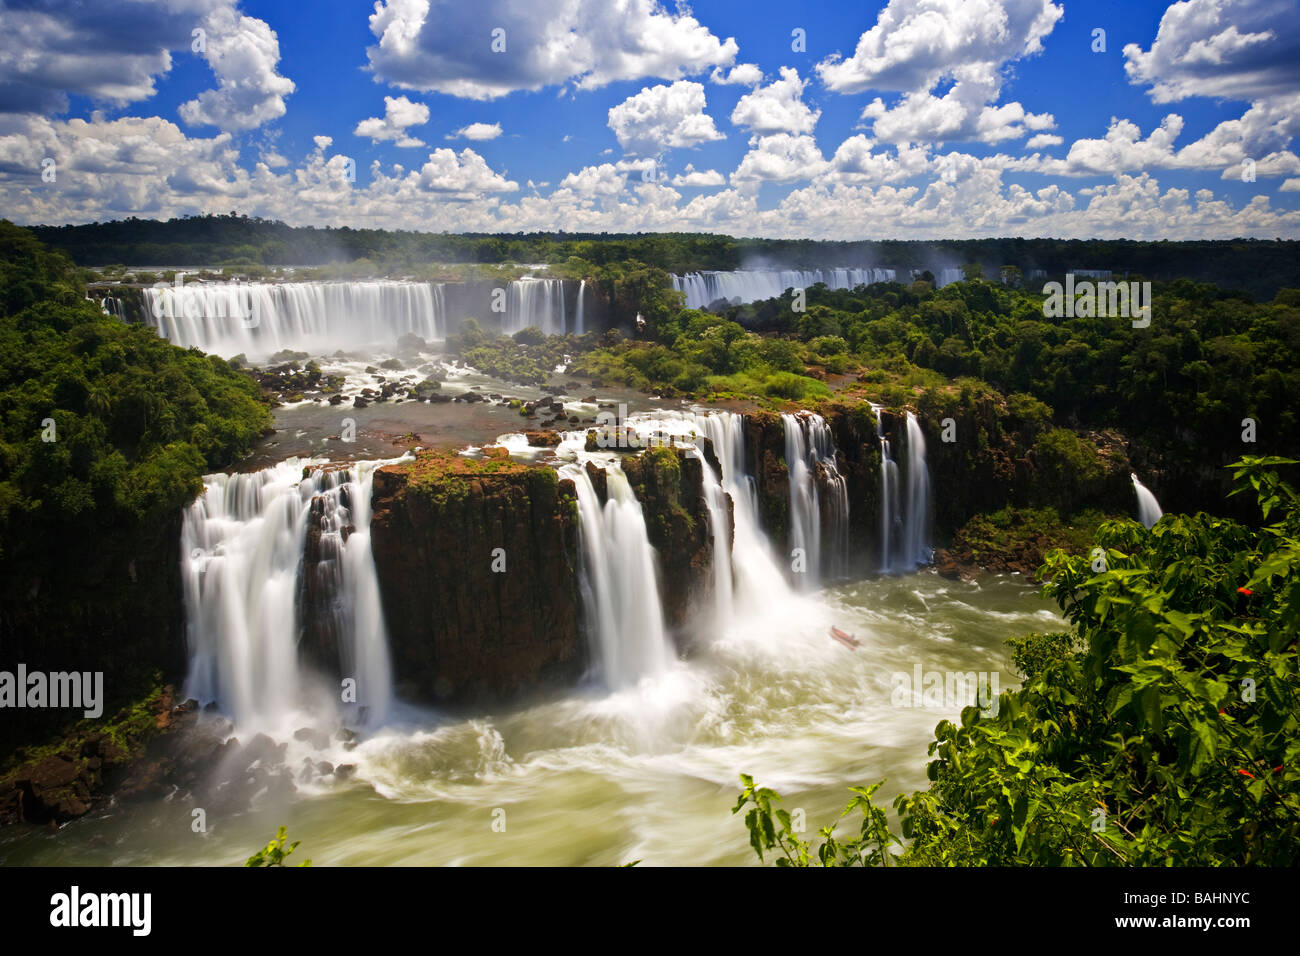 The spectacular Iguassu Falls located in Brazil, Argentina, and Paraguay in South America. Stock Photo